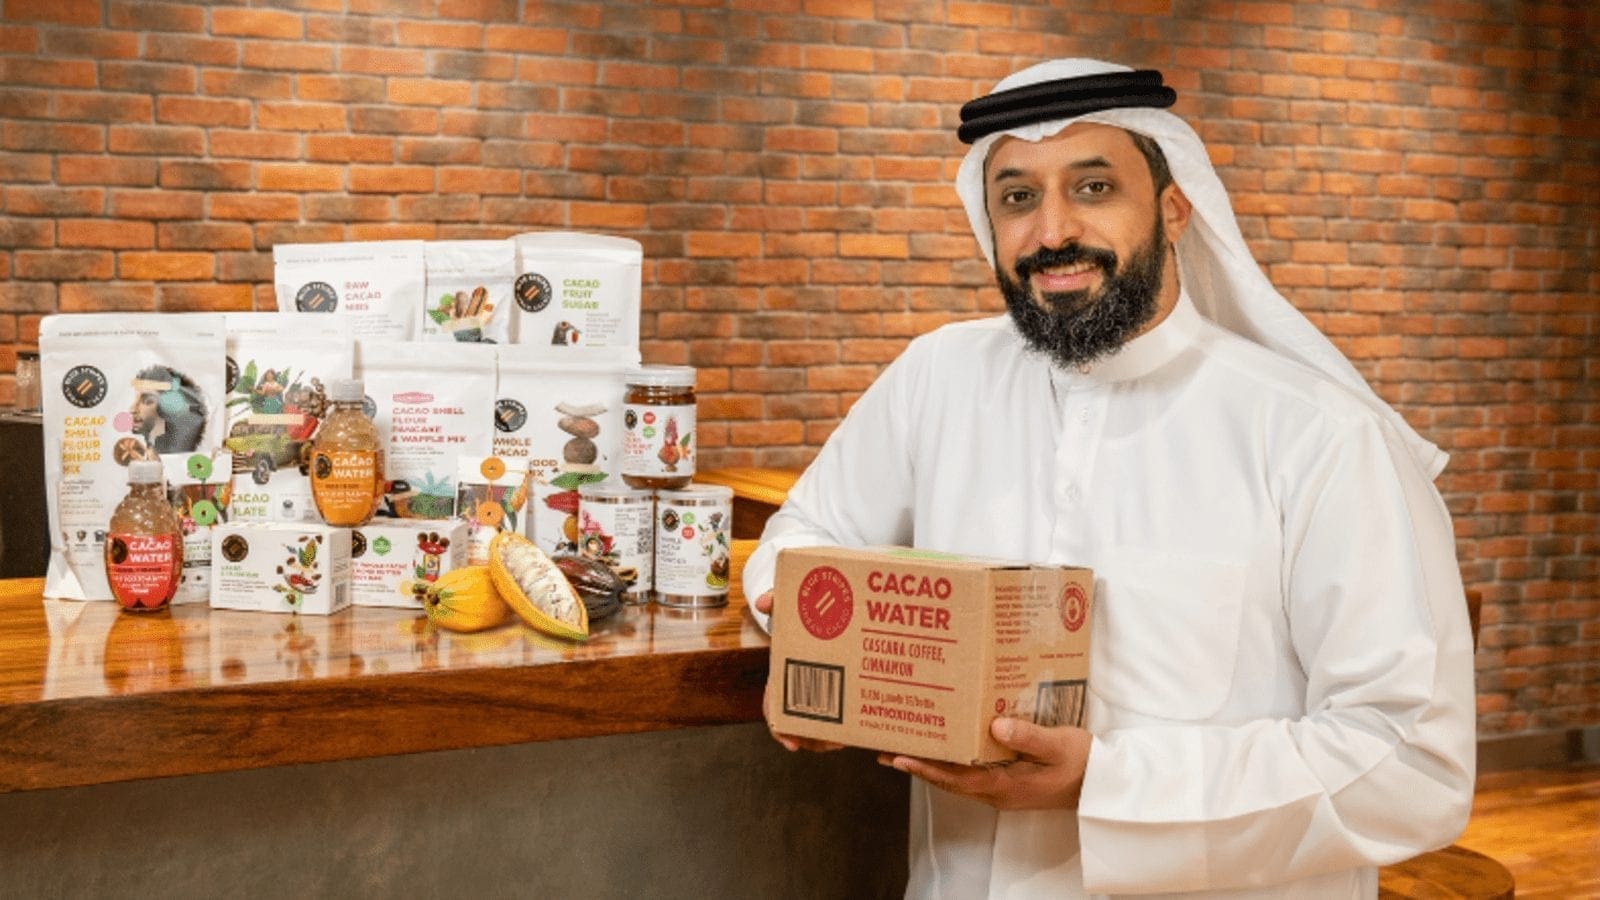 Dubai eyes share of lucrative cacao trade, seeks to make emirate an international trade hub for the commodity